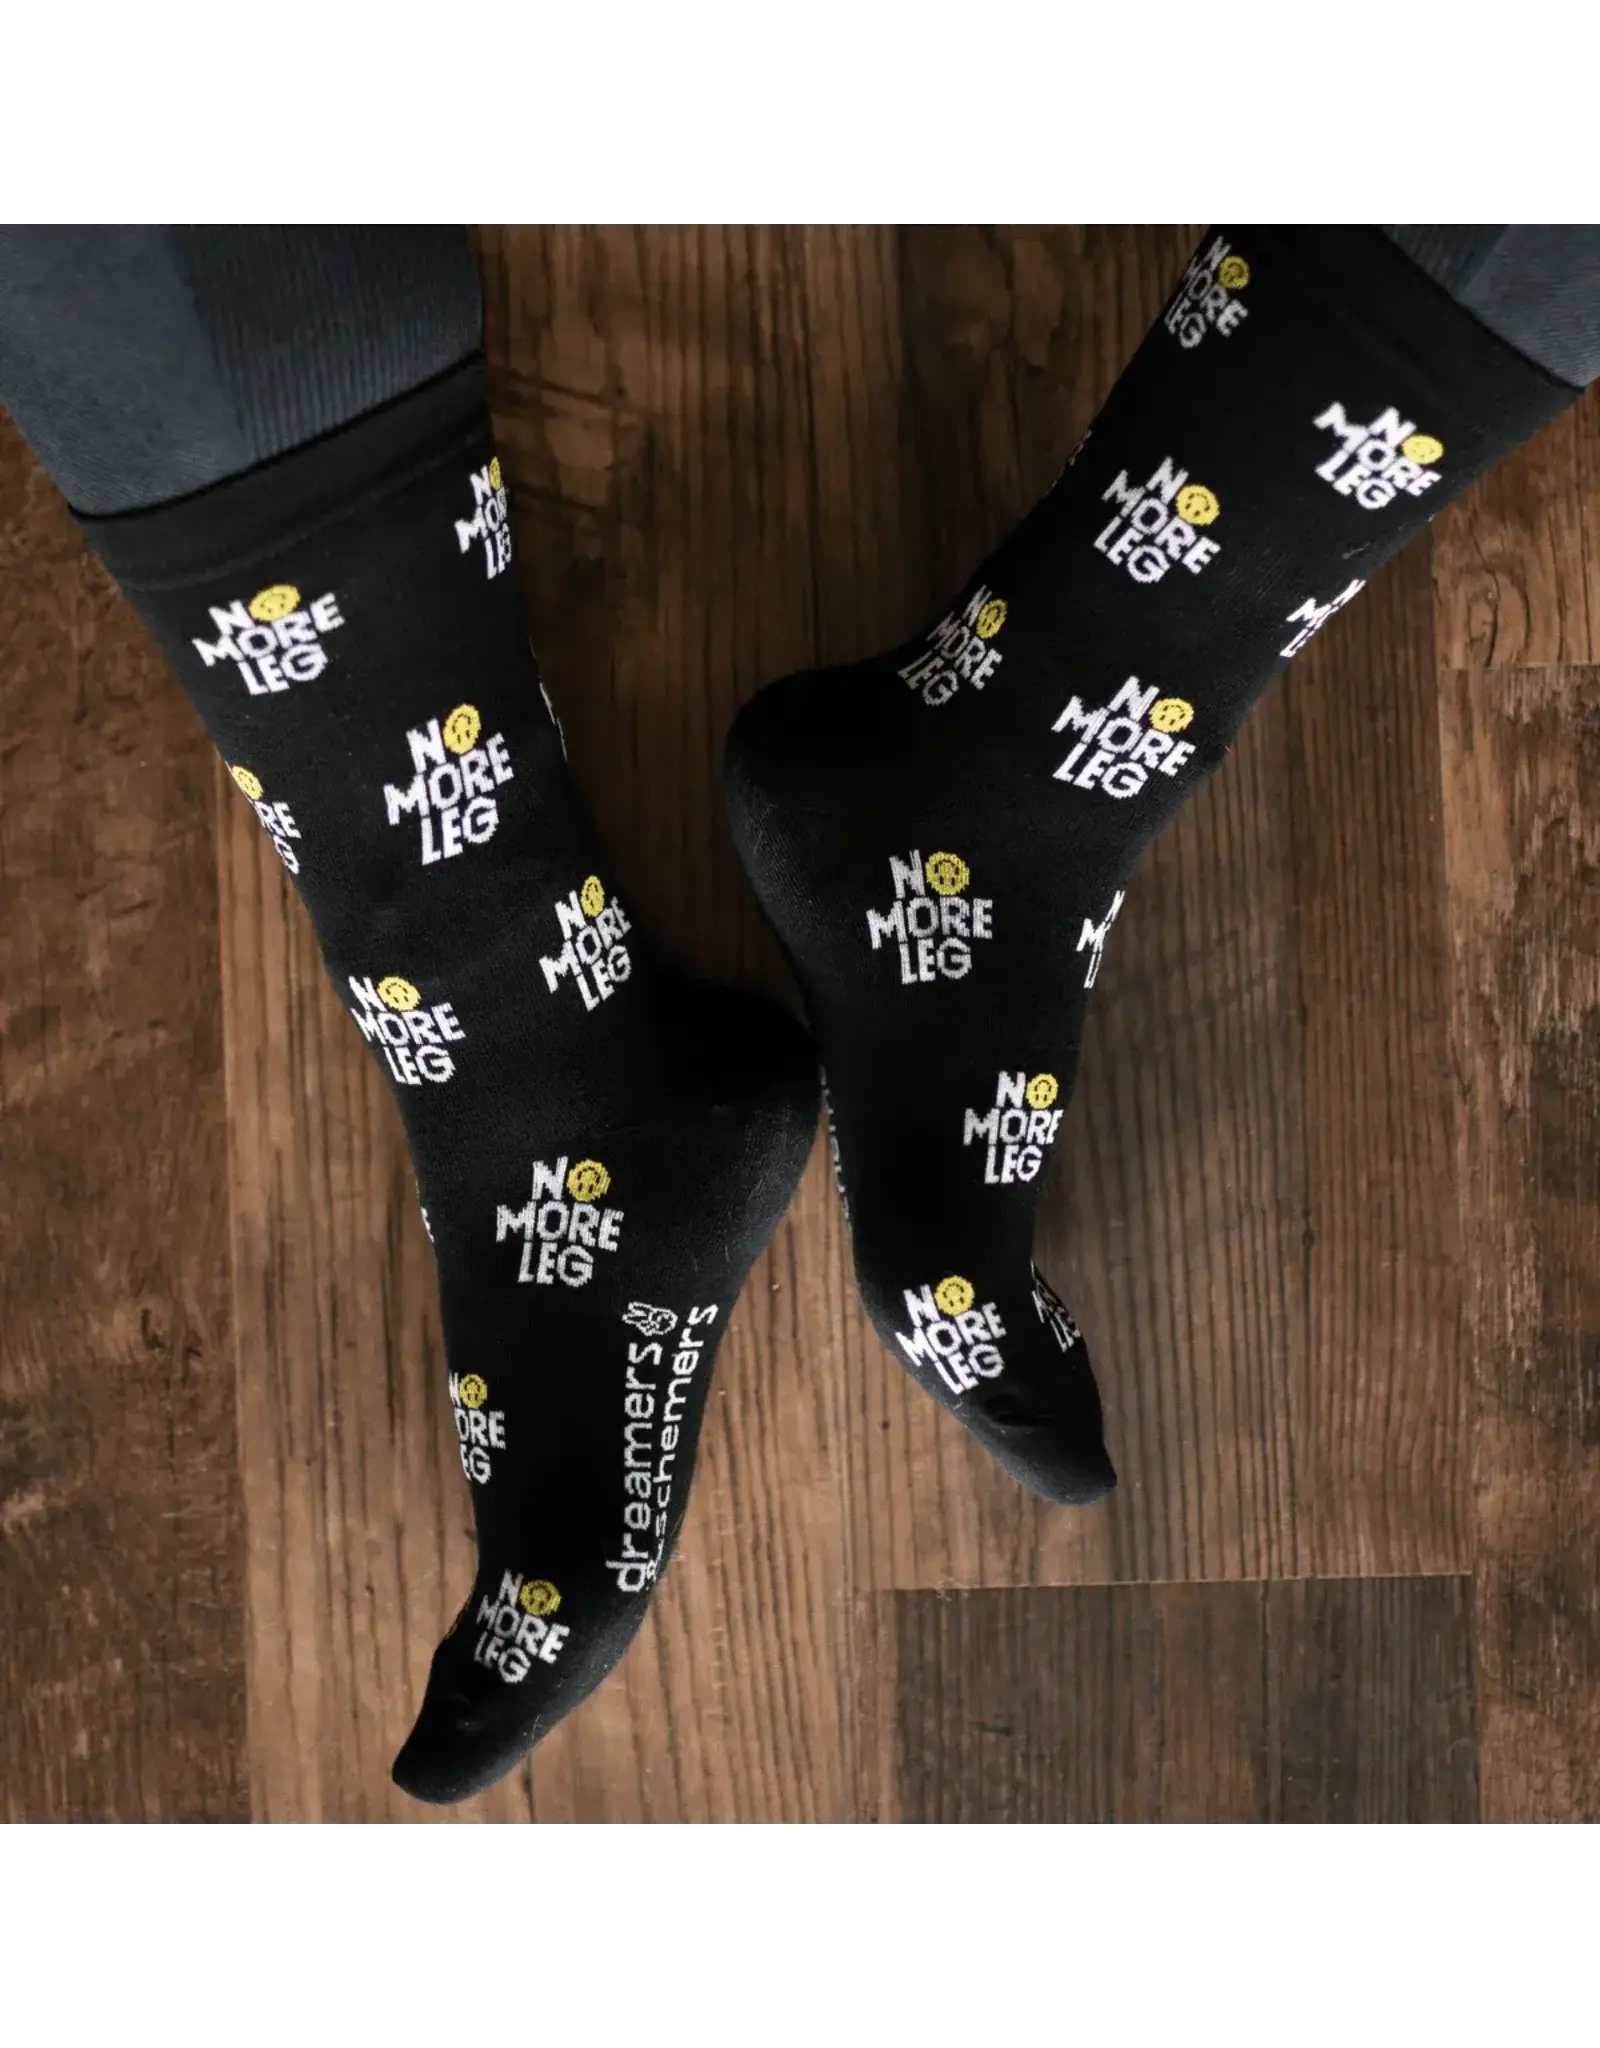 Dreamers and Schemers No More Leg Crew Socks Size 6-11